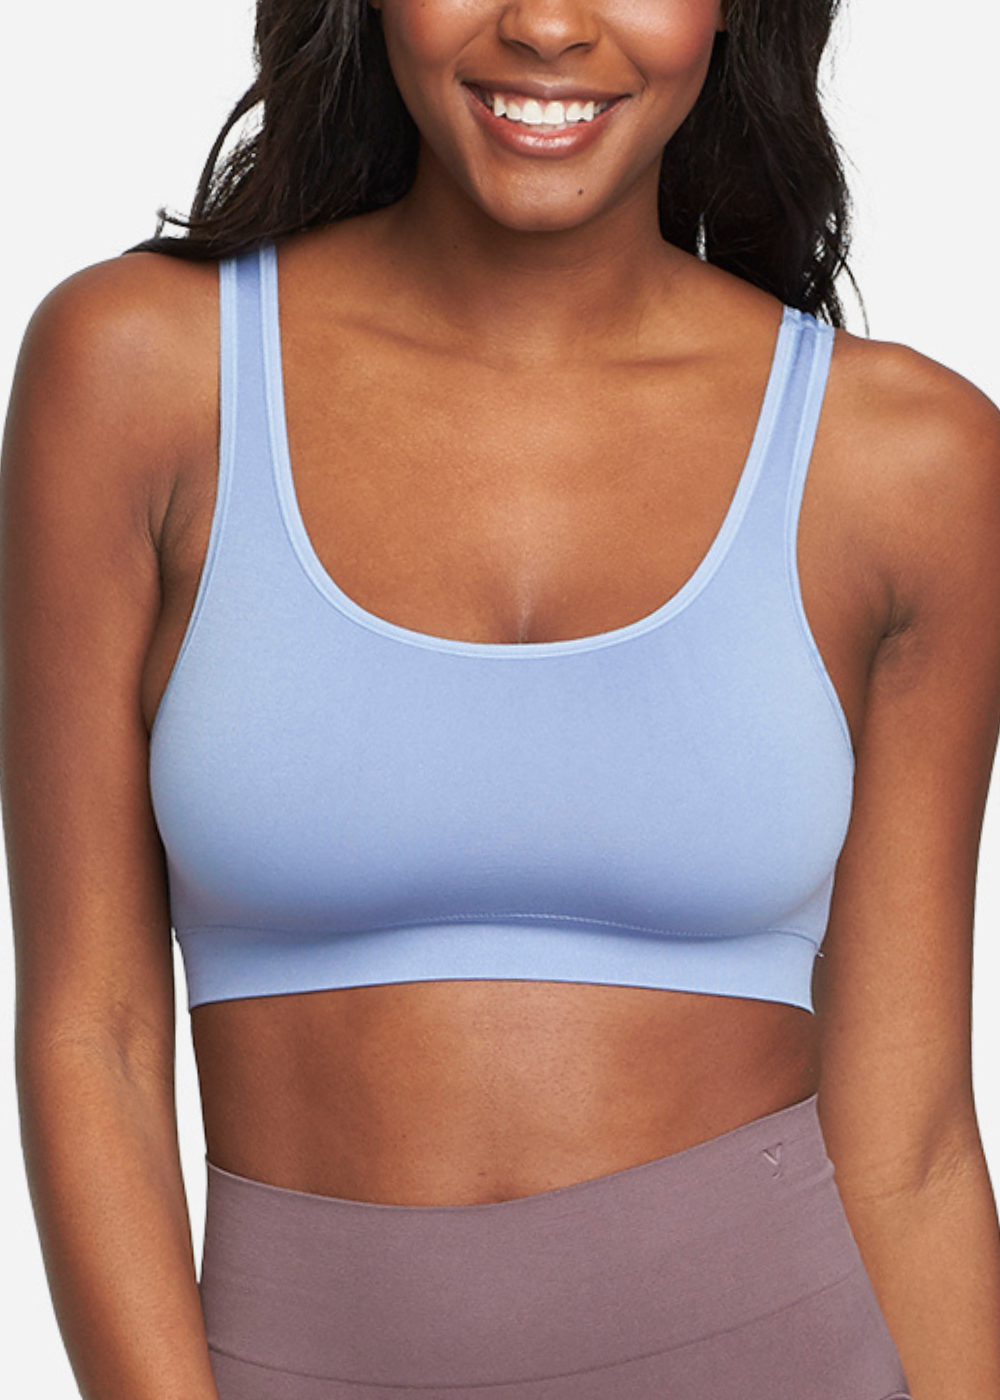 Eva Square Neck Bralette - Seamless from Yummie in English Manor Blue  - 1